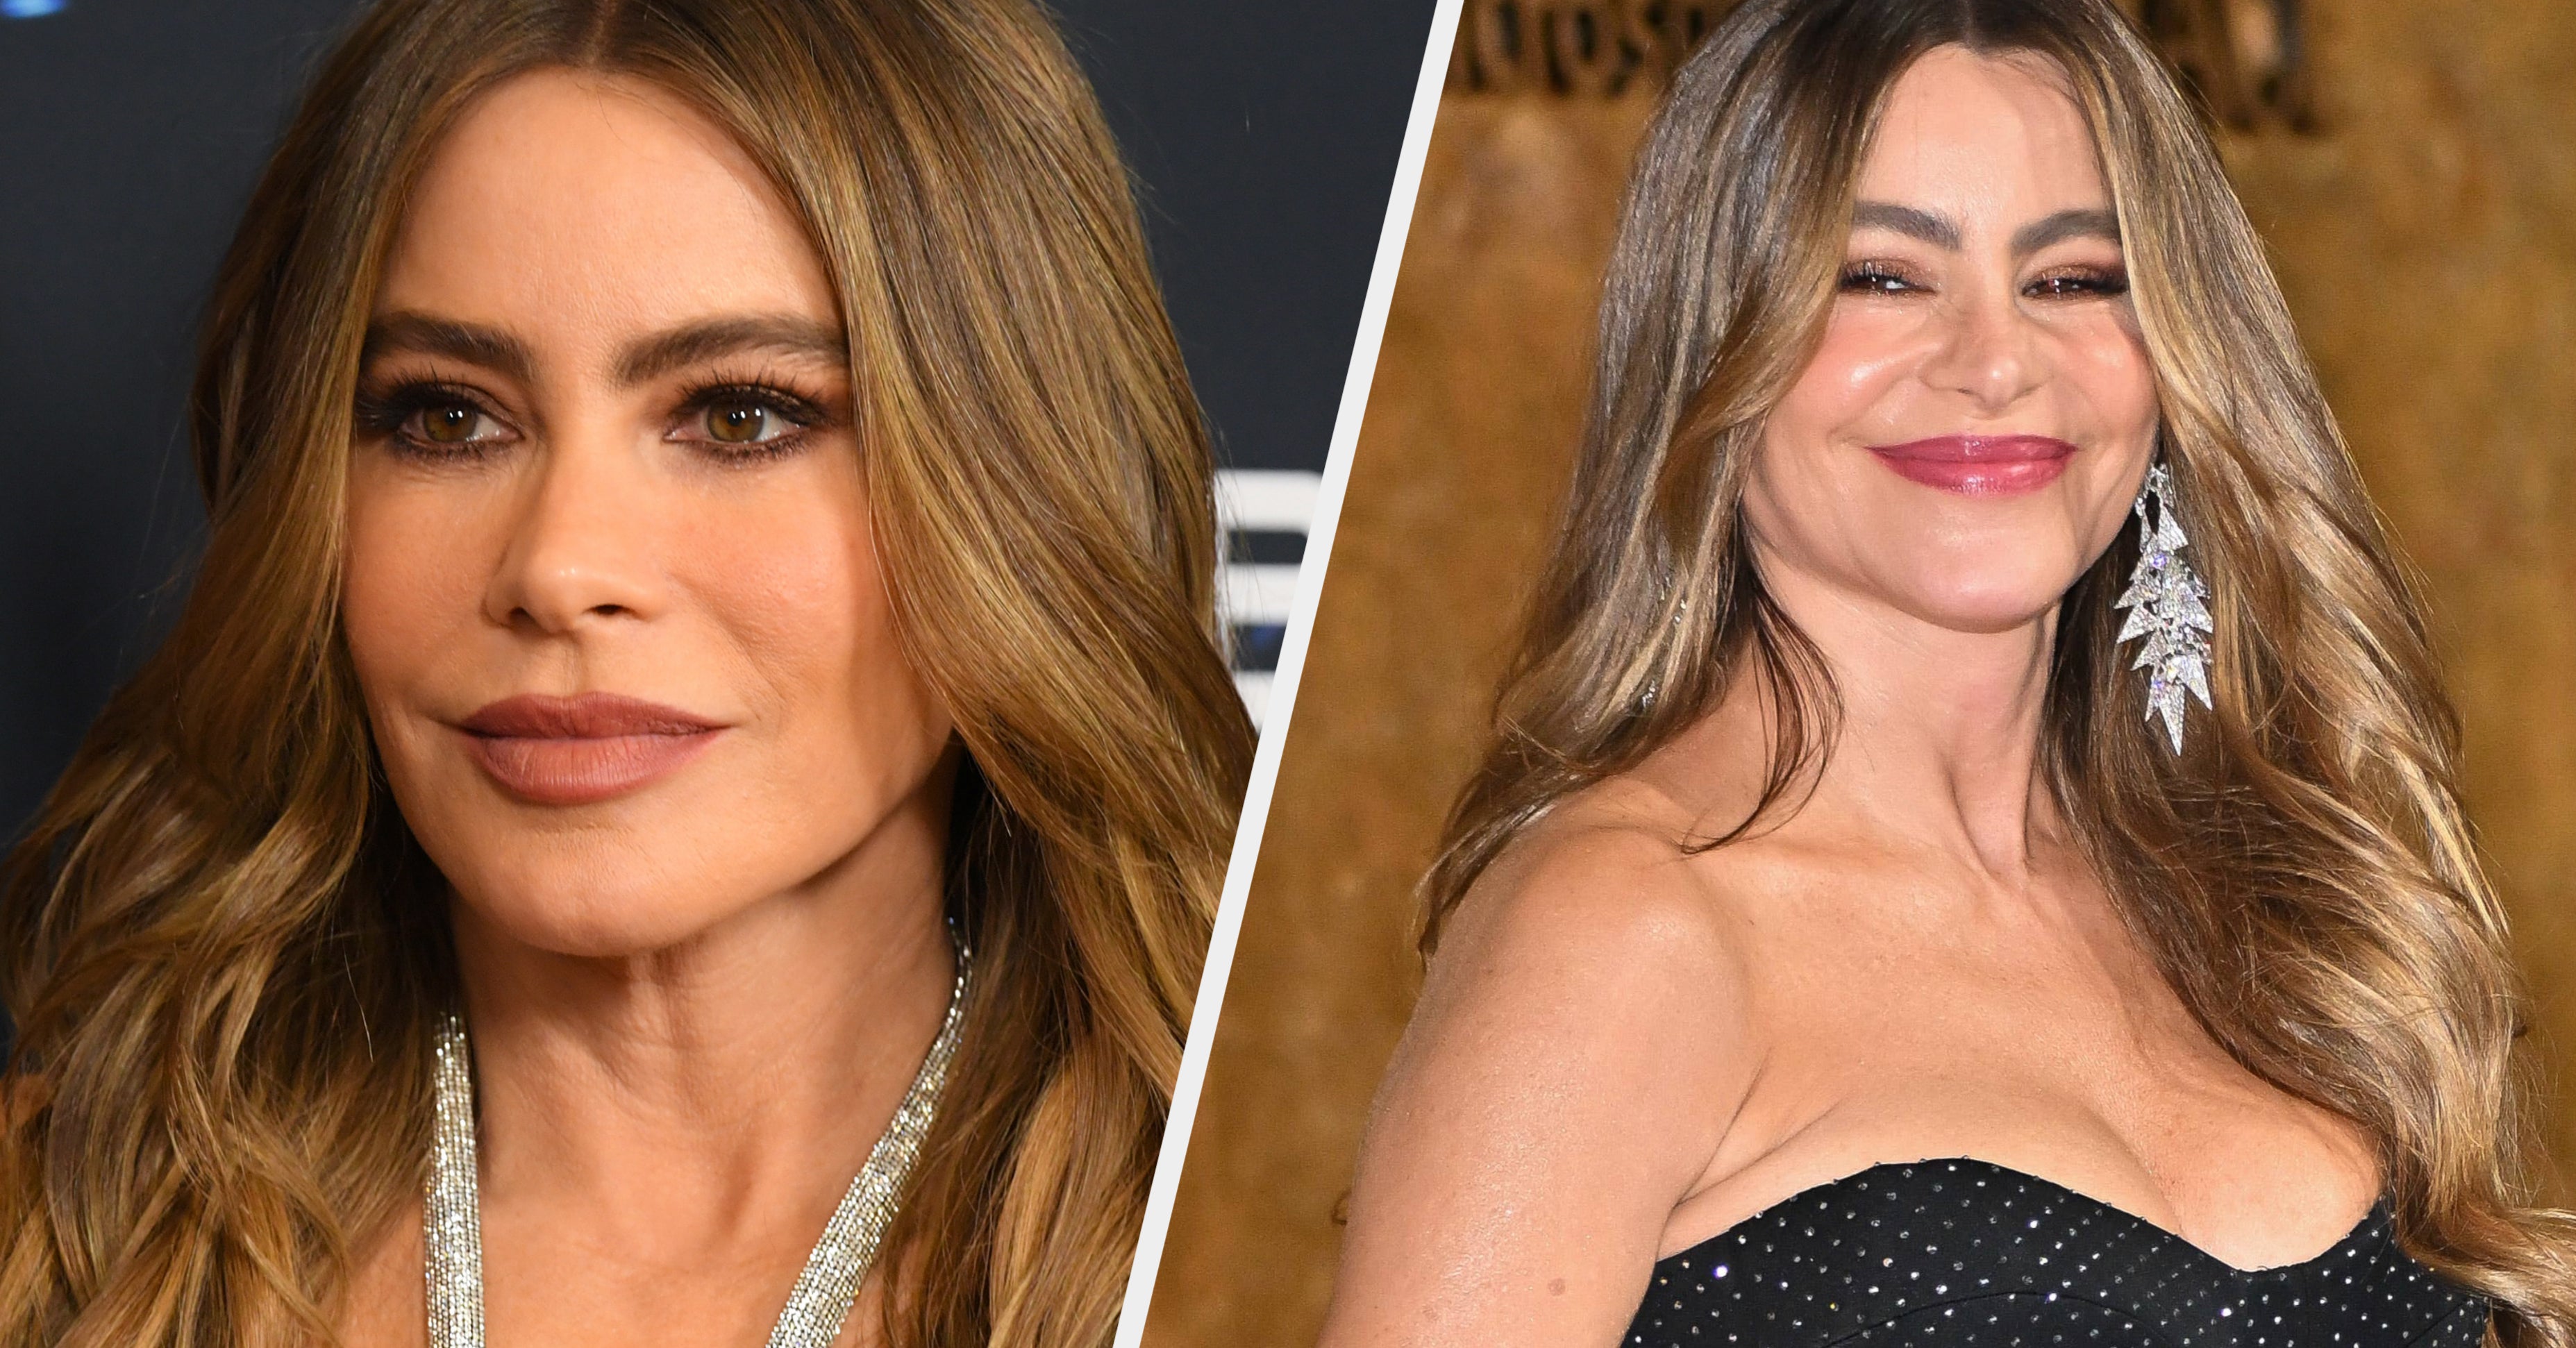 Sofia Vergara looks unrecognizable with bigger nose and wrinkles